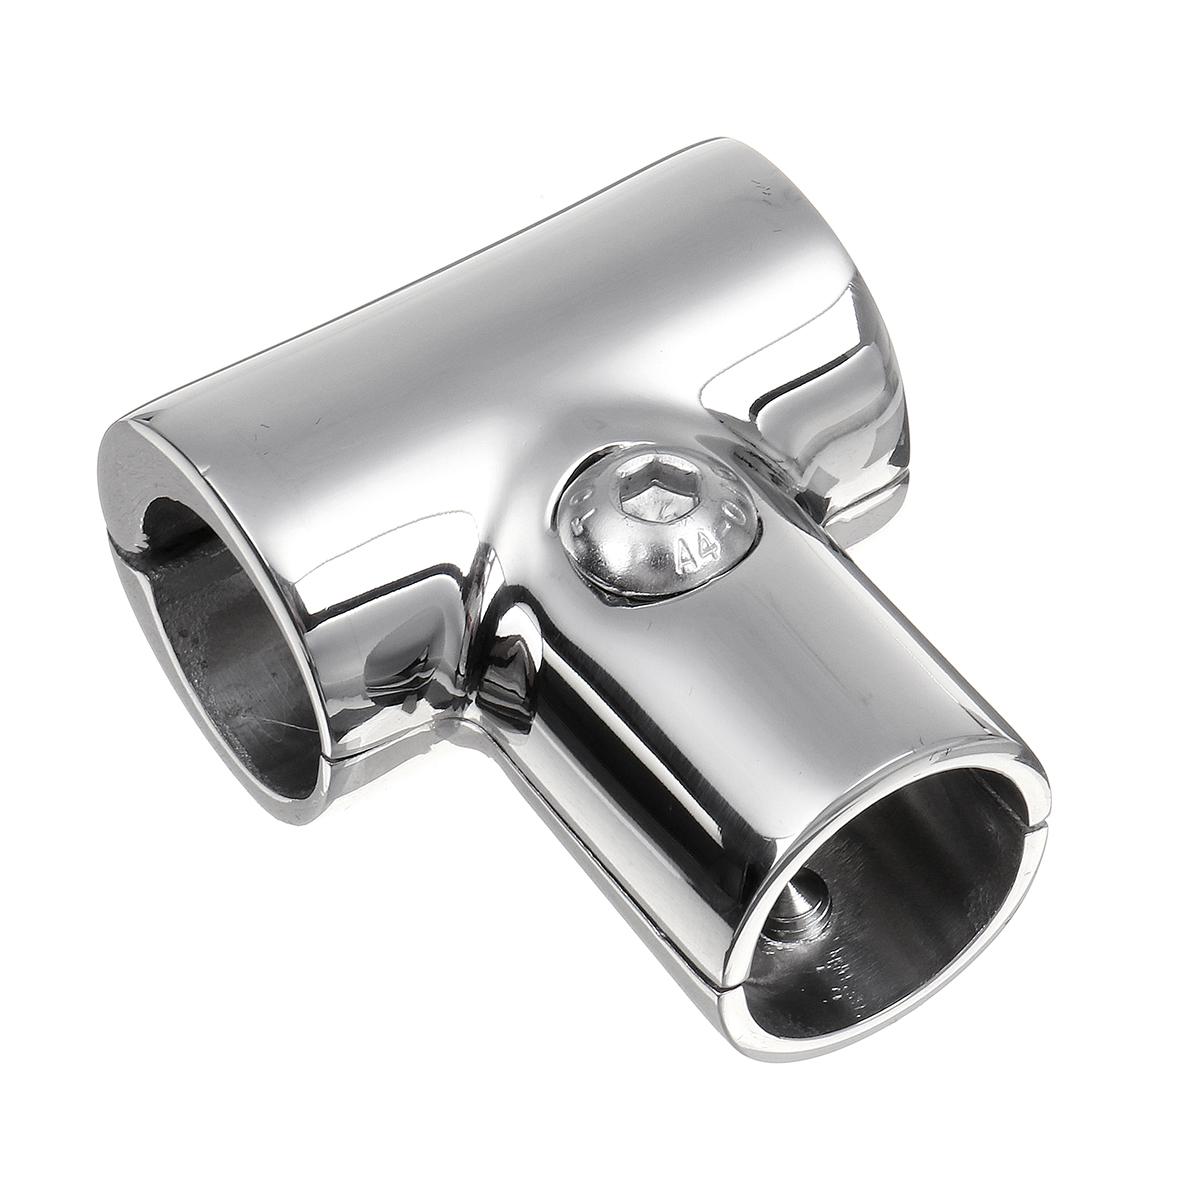 90° 3 Ways Separable Pipe Tube Connector Clamp 316 Stainless Steel Marine Boat Yacht Railing Handrail